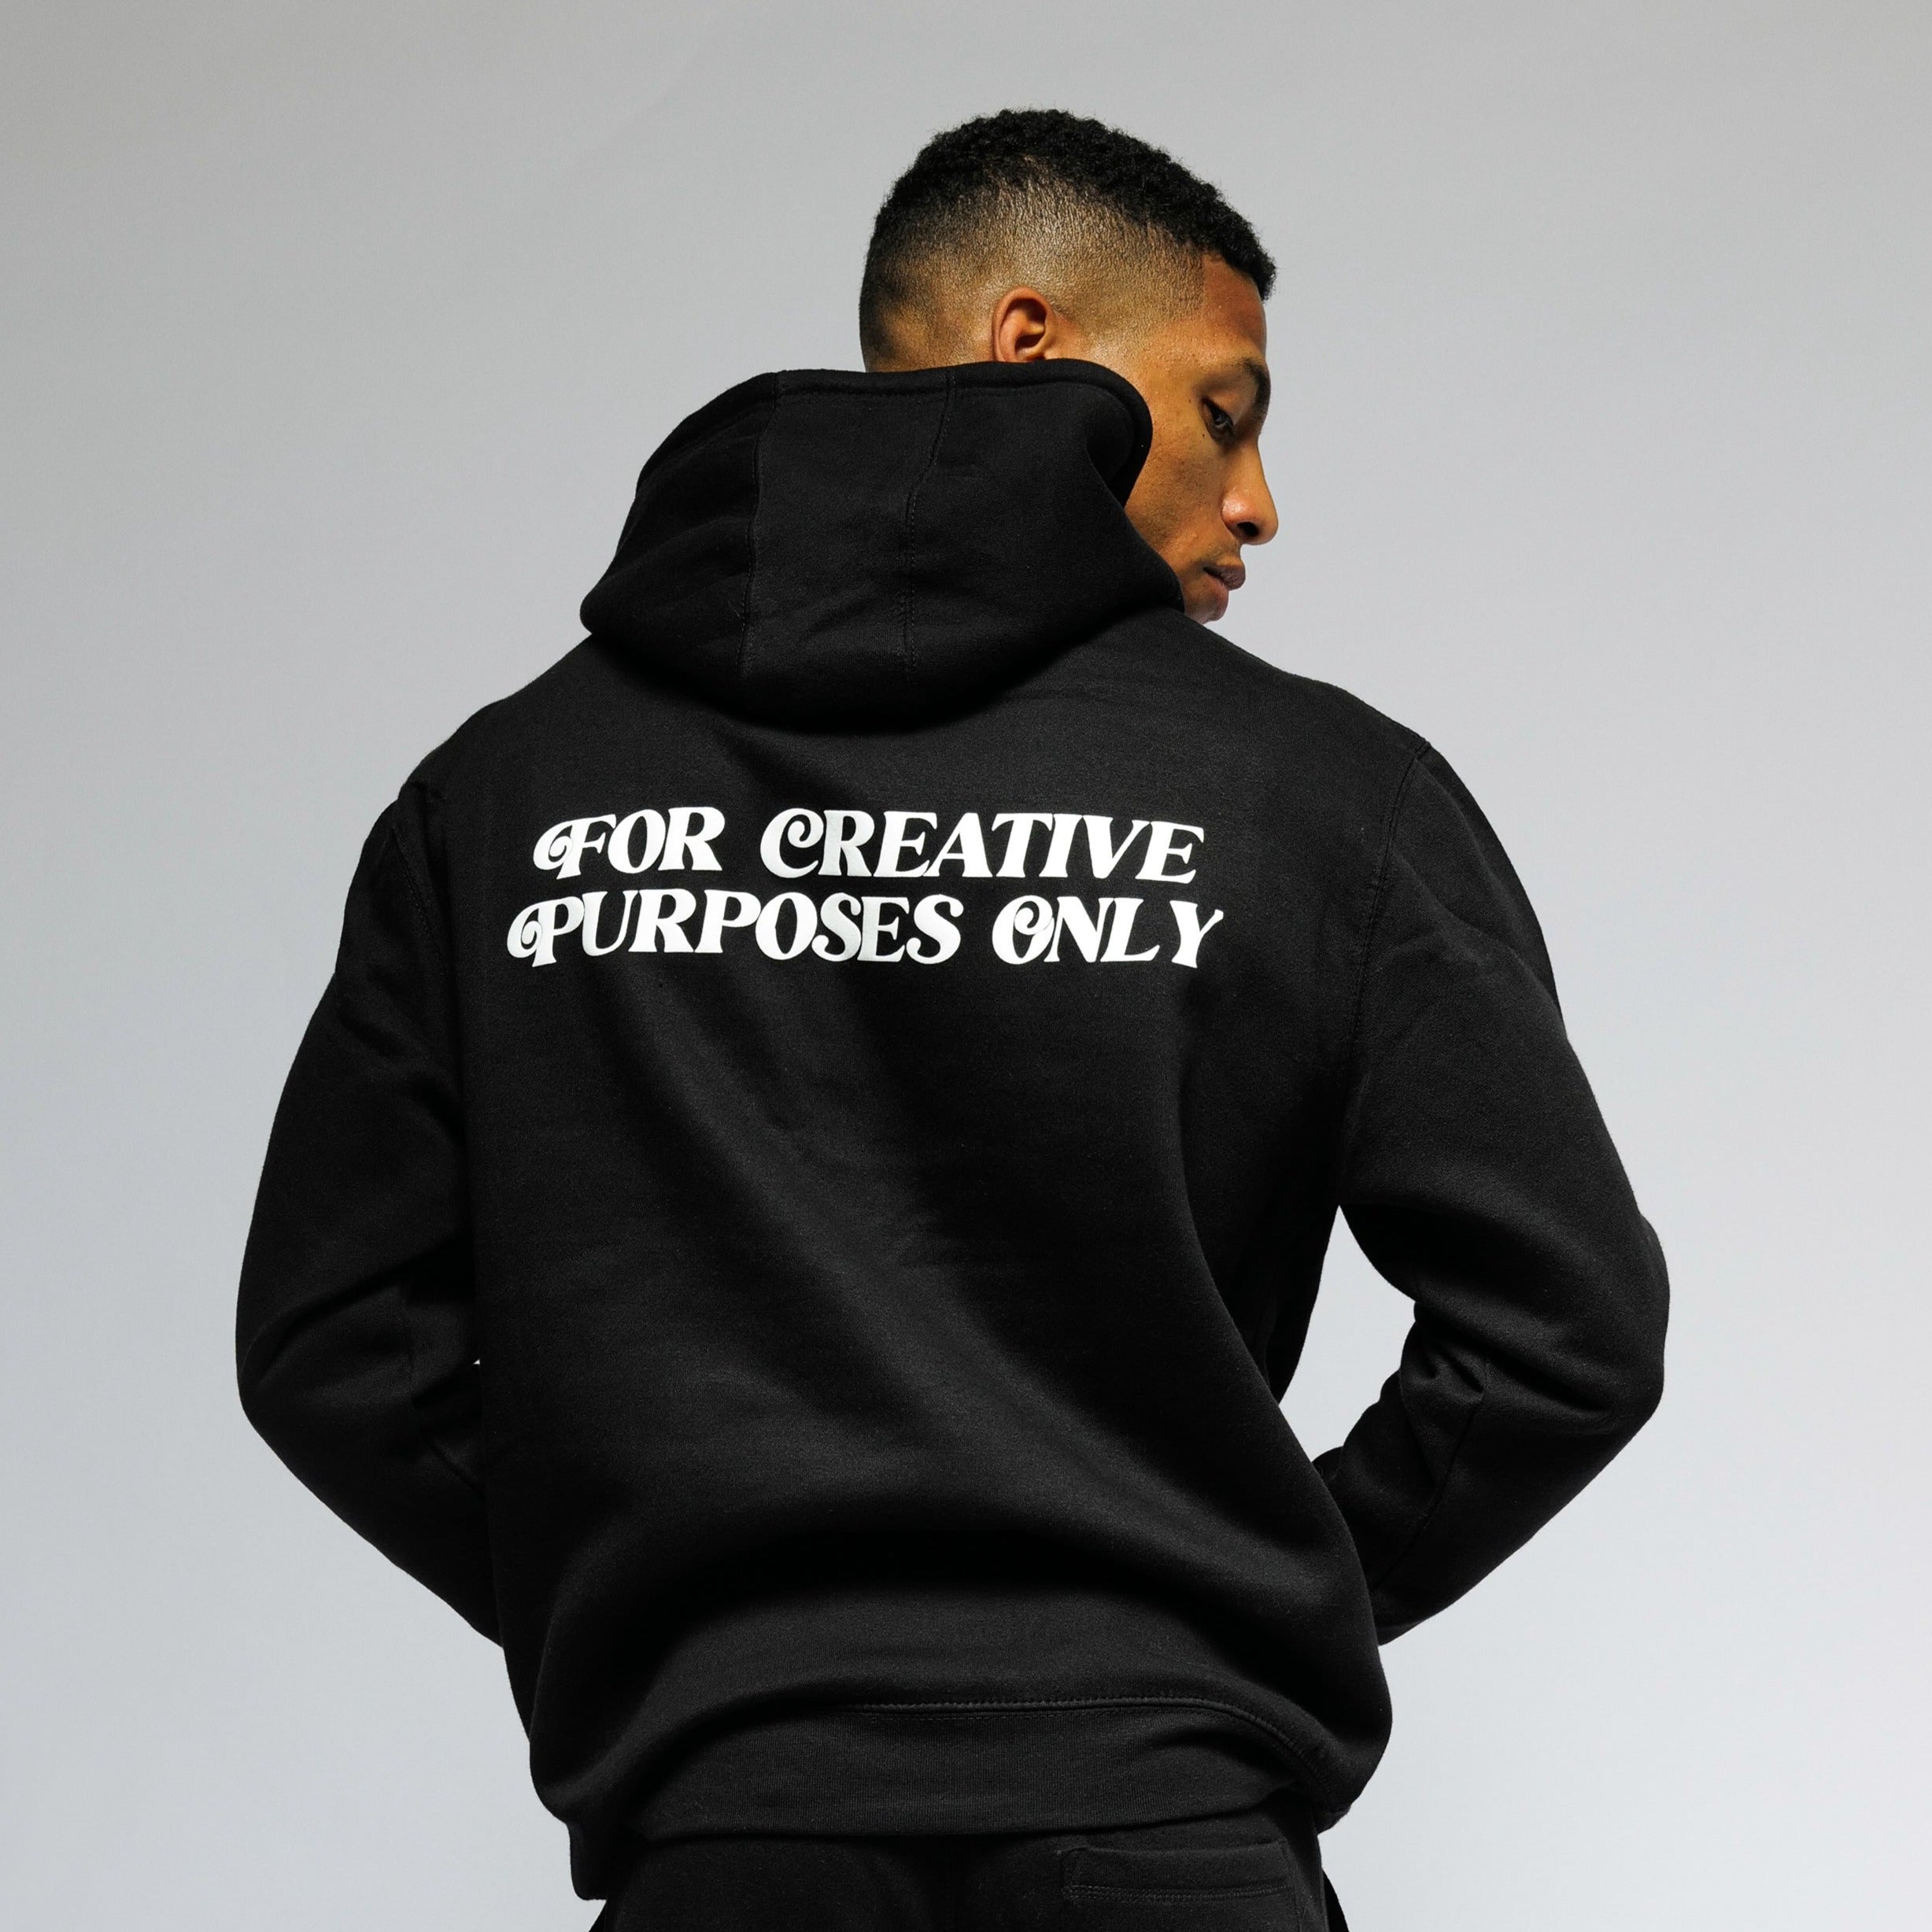 For Creative Purposes Only - Hoodie (Black + White)